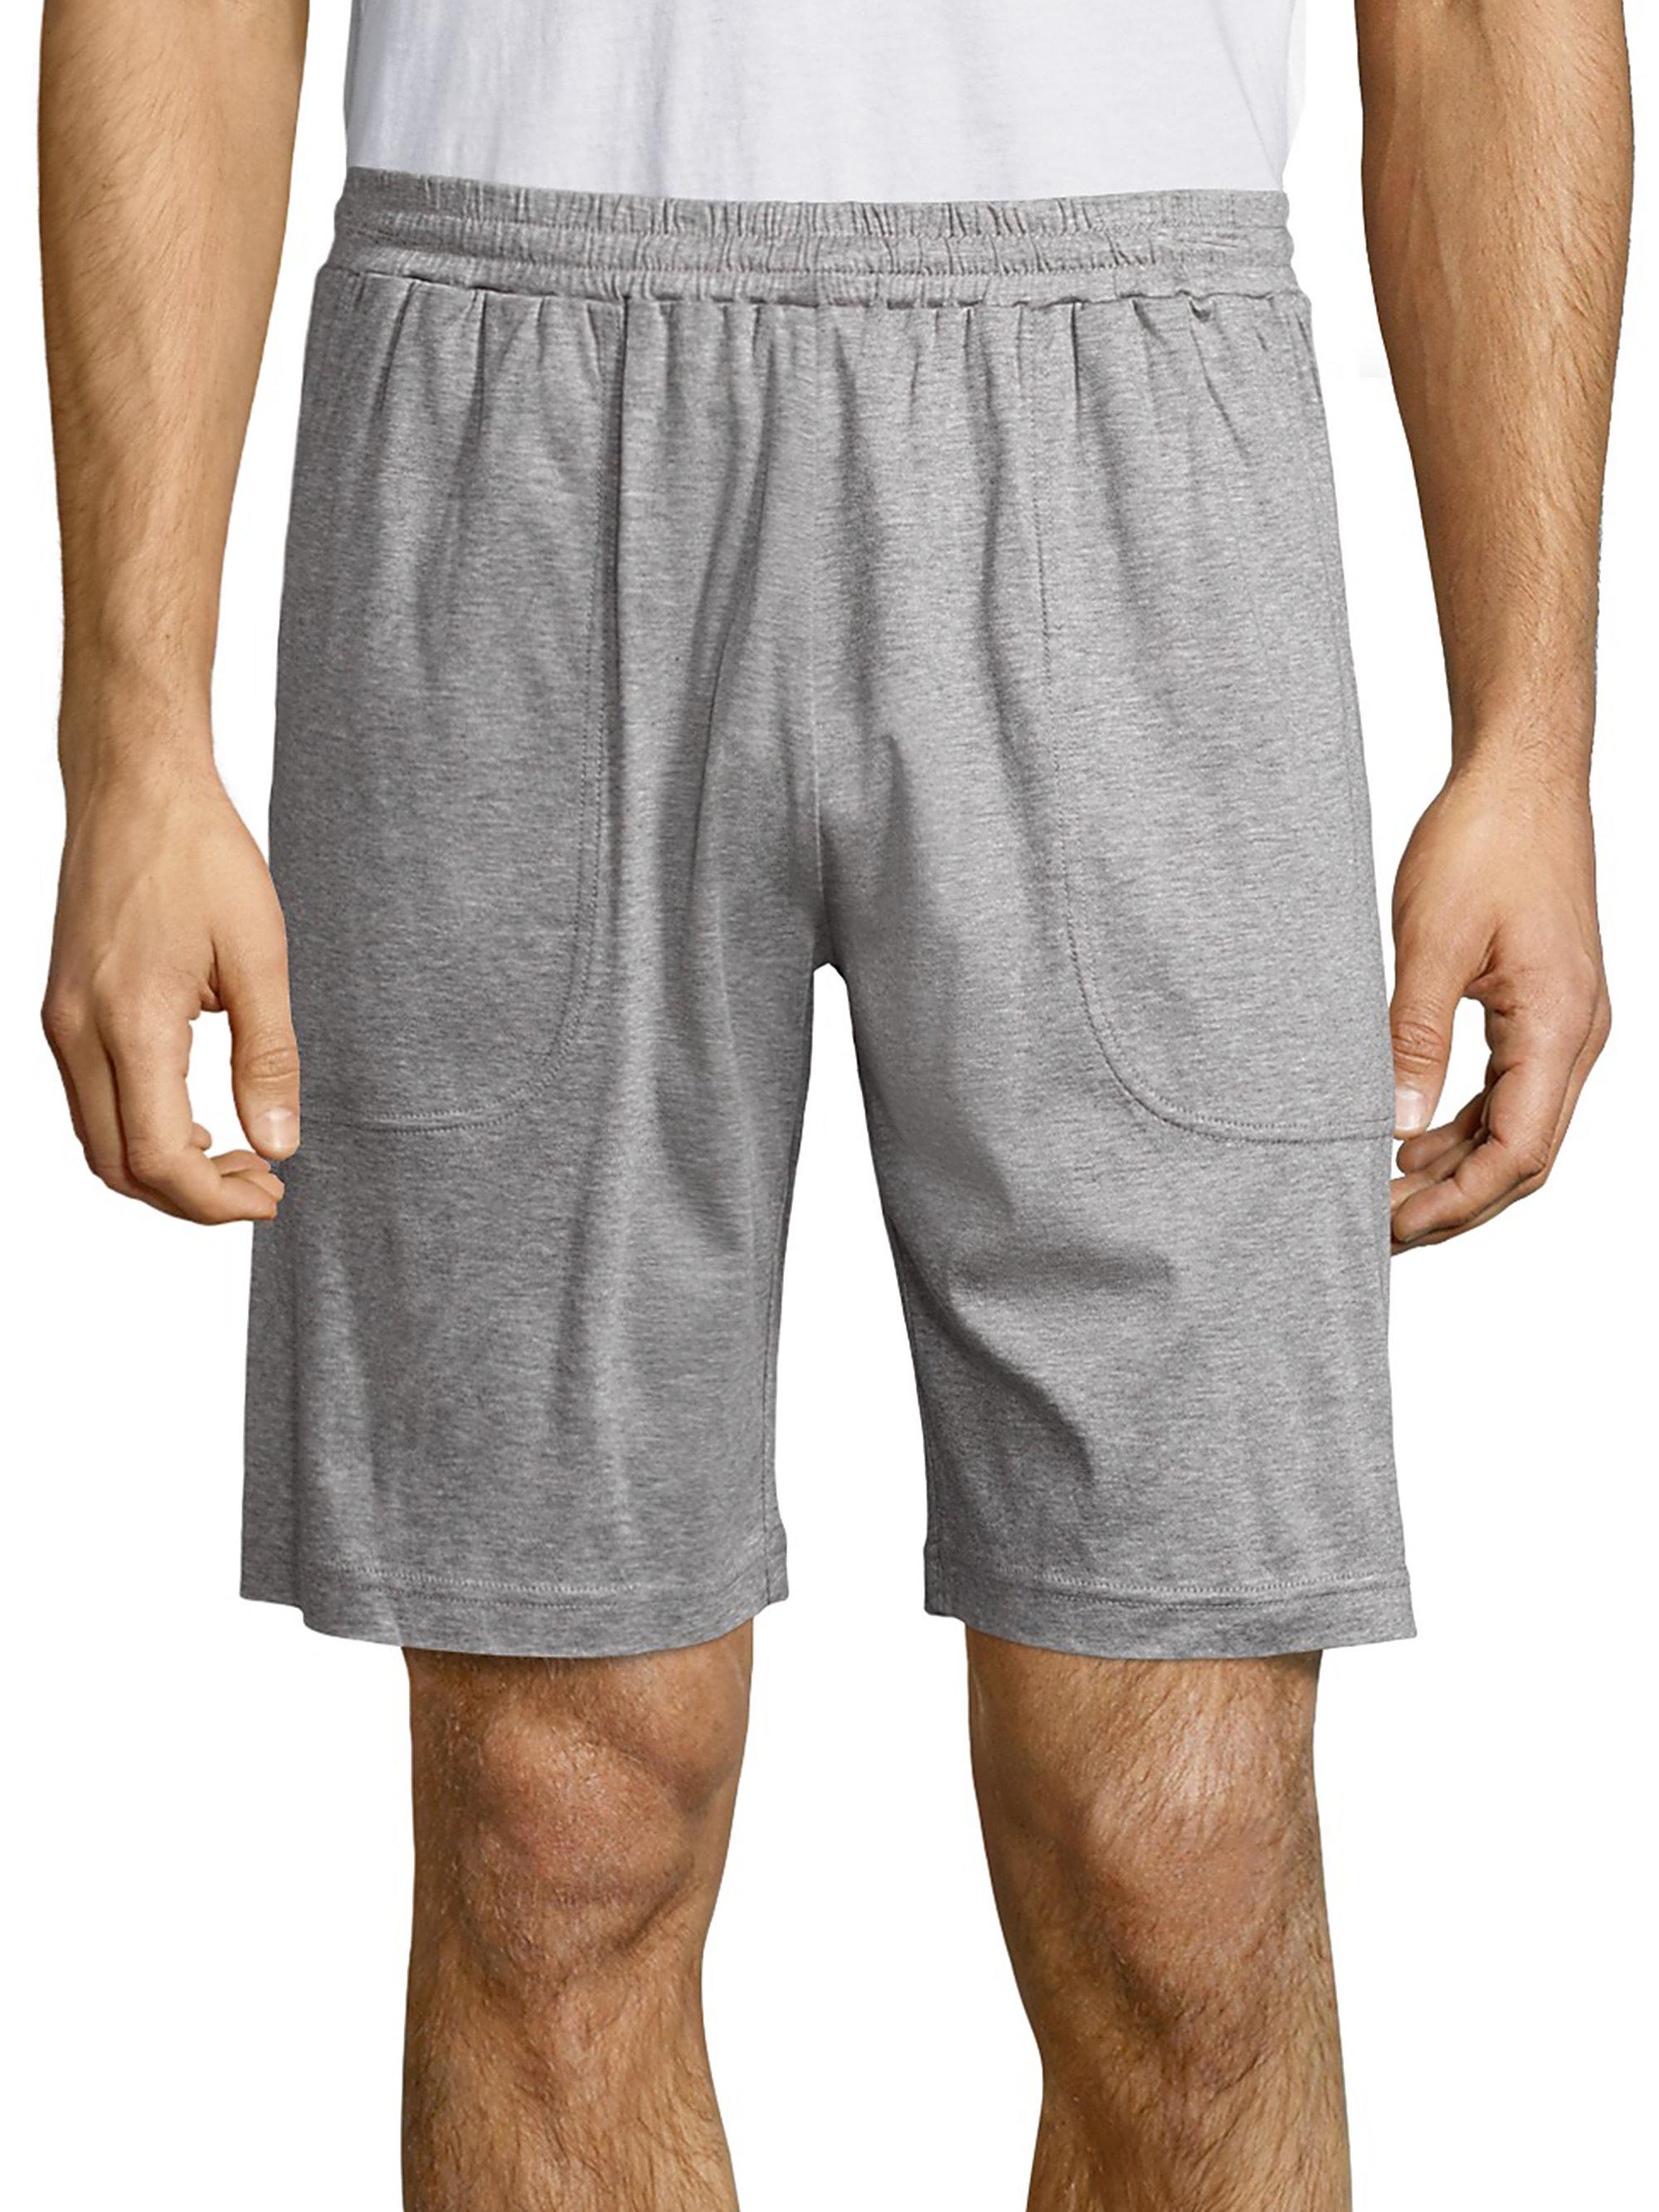 Lyst - Saks Fifth Avenue Heathered Cotton Shorts in Gray for Men